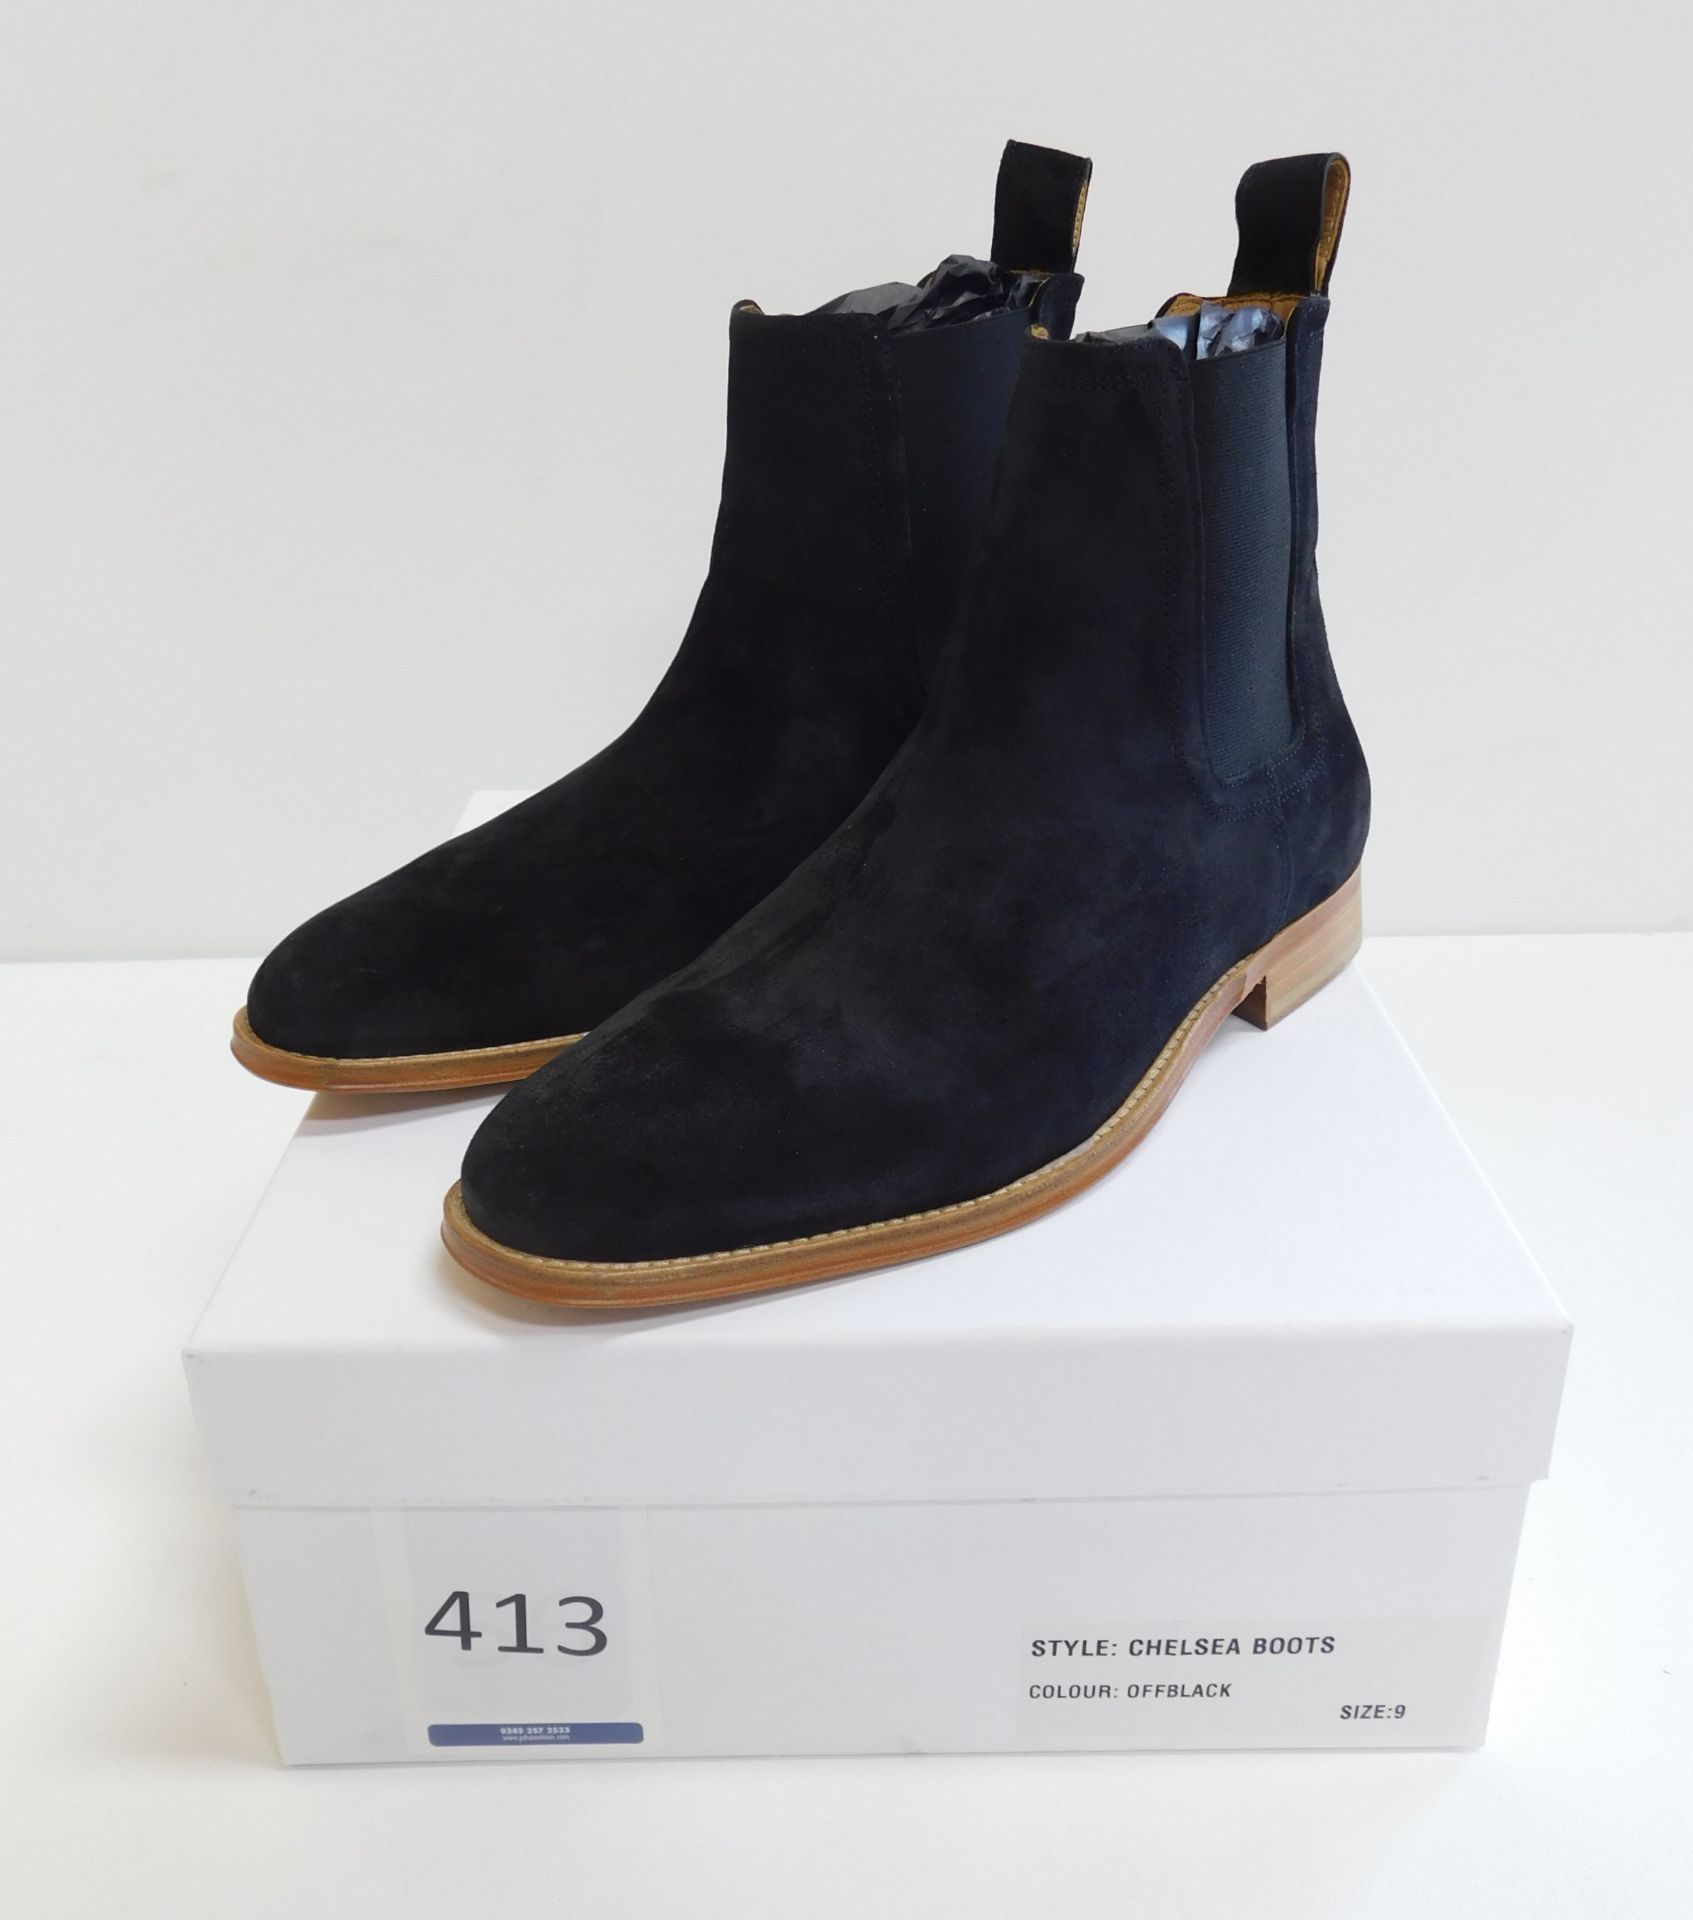 Pair of Ardent “Offblack” Chelsea Boots, Size 9 (Located: Brentwood. Please Refer to General Notes)